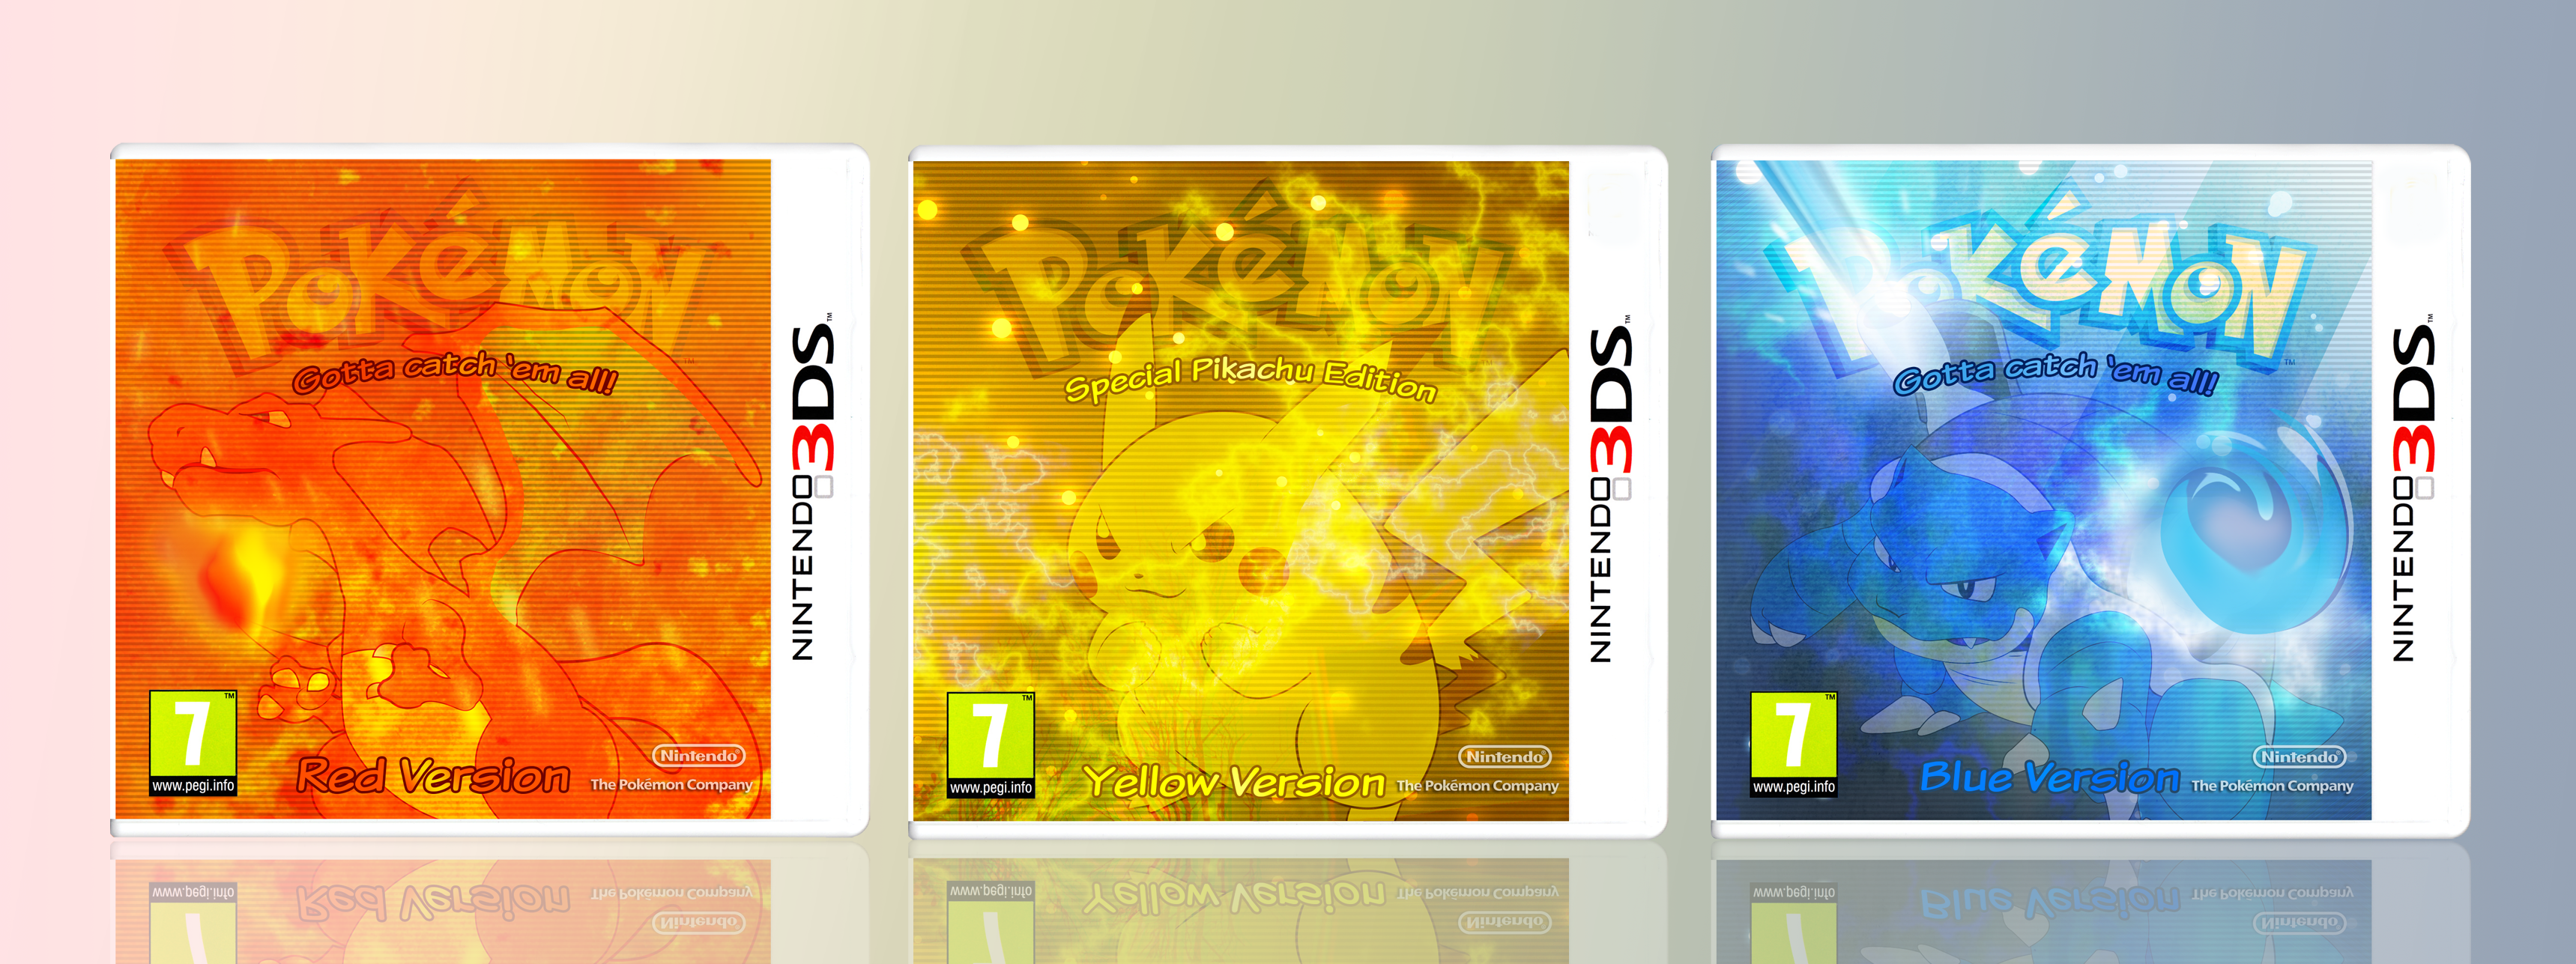 Pokemon Red, Yellow & Blue box cover